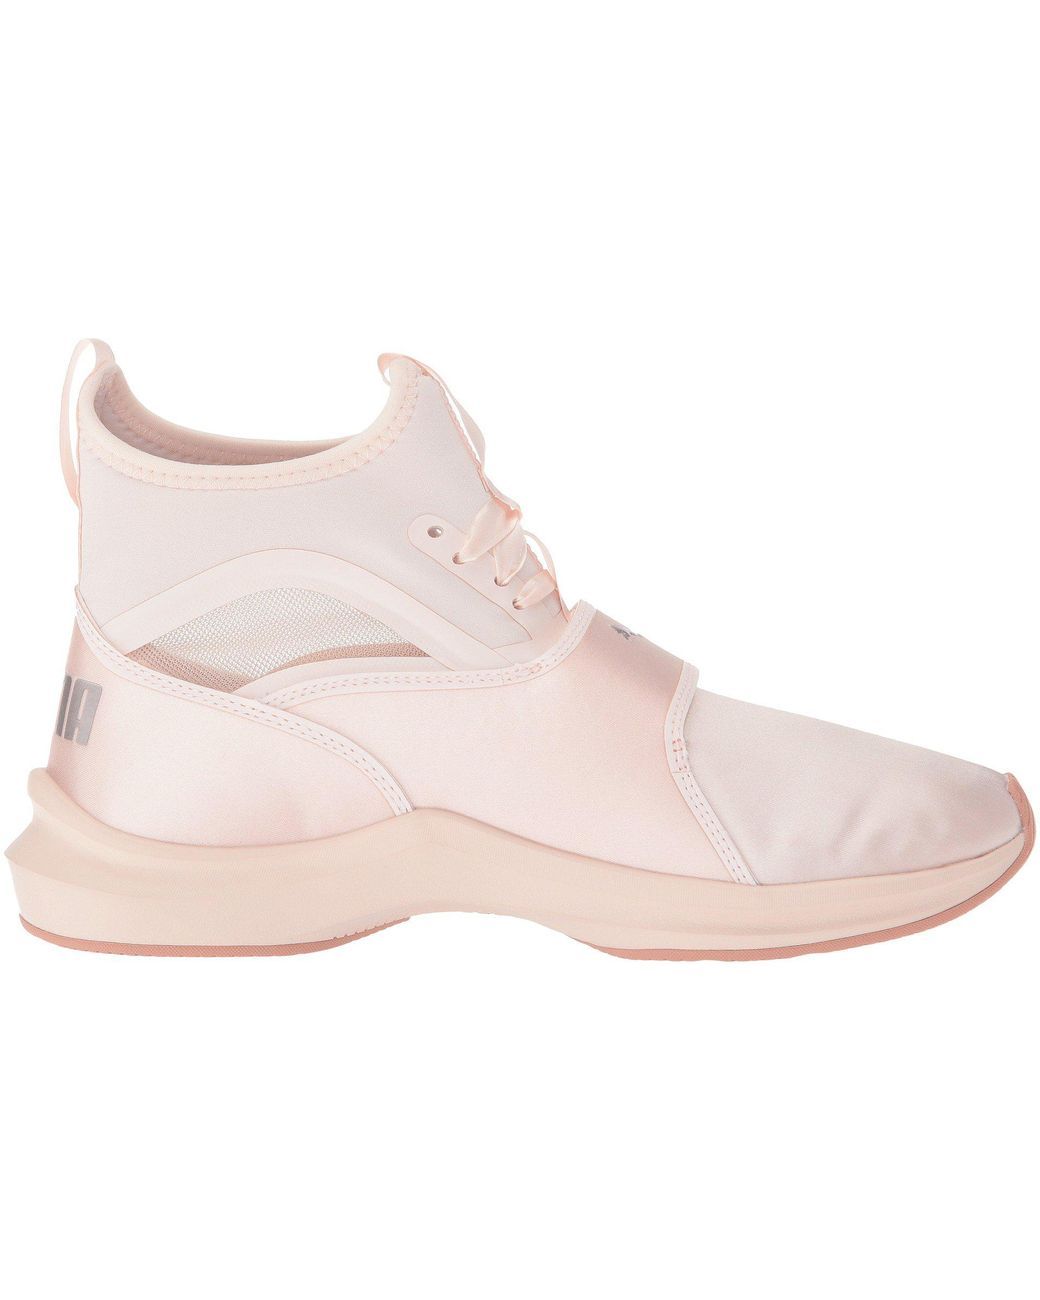 PUMA Phenom Satin Ep (pearl/pearl) Women's Shoes in Pink | Lyst